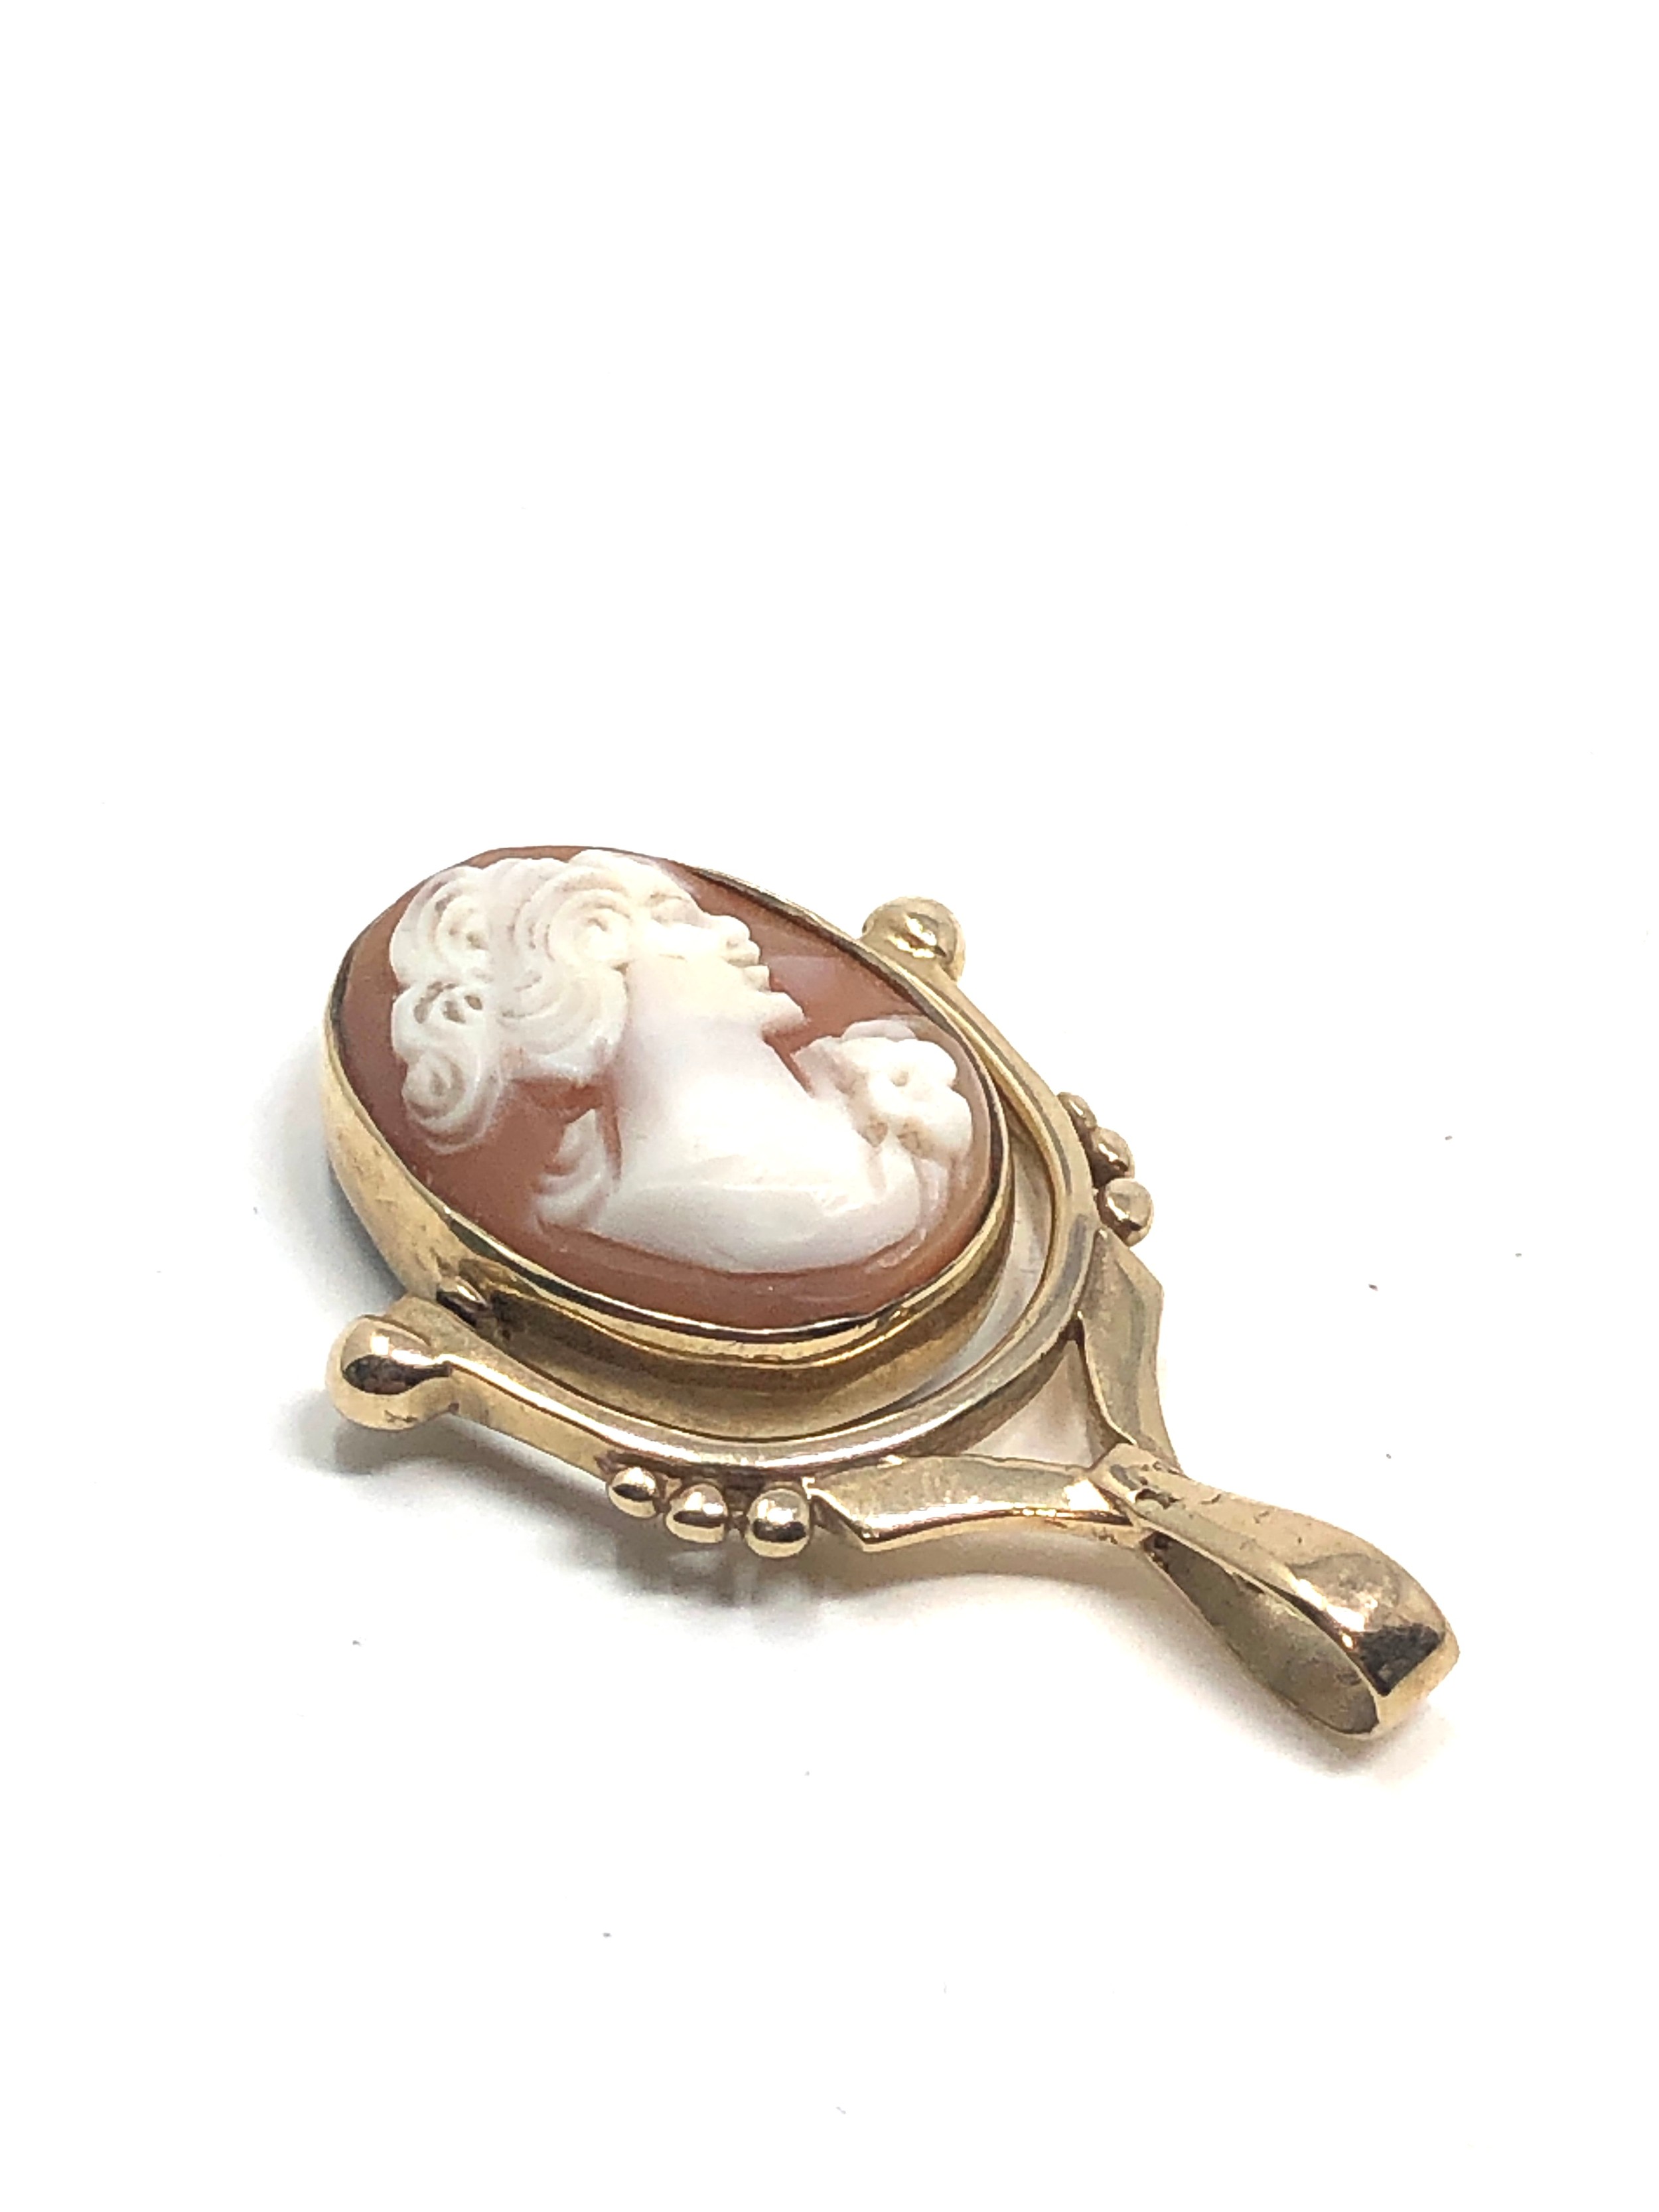 9ct gold shell cameo & bloodstone spinner dob (7.5g) - Image 2 of 2